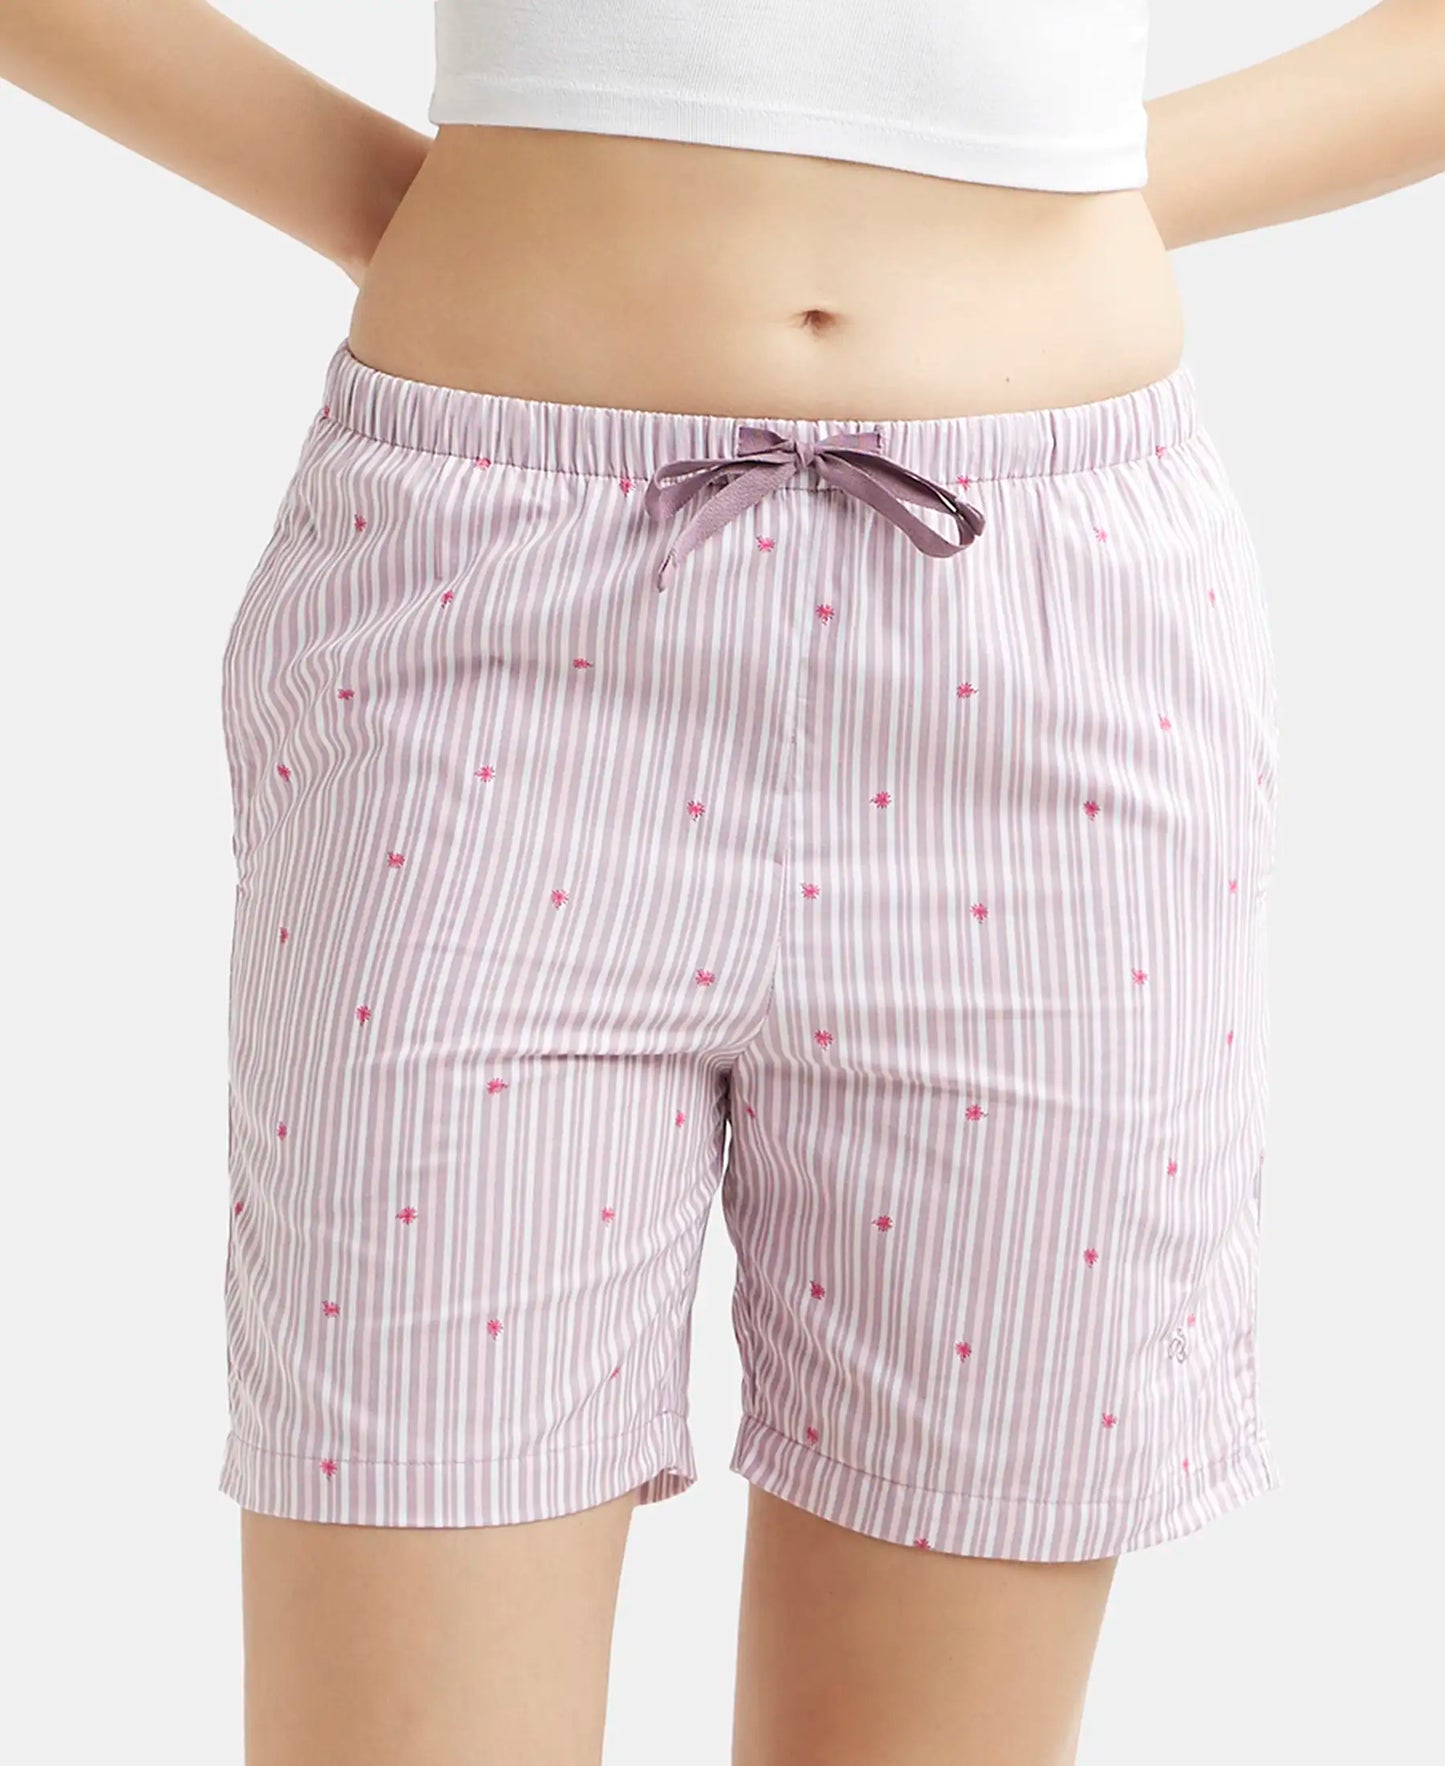 Super Combed Cotton Yarn Dyed Woven Relaxed Fit Striped Shorts with Side Pockets - Old Rose-5